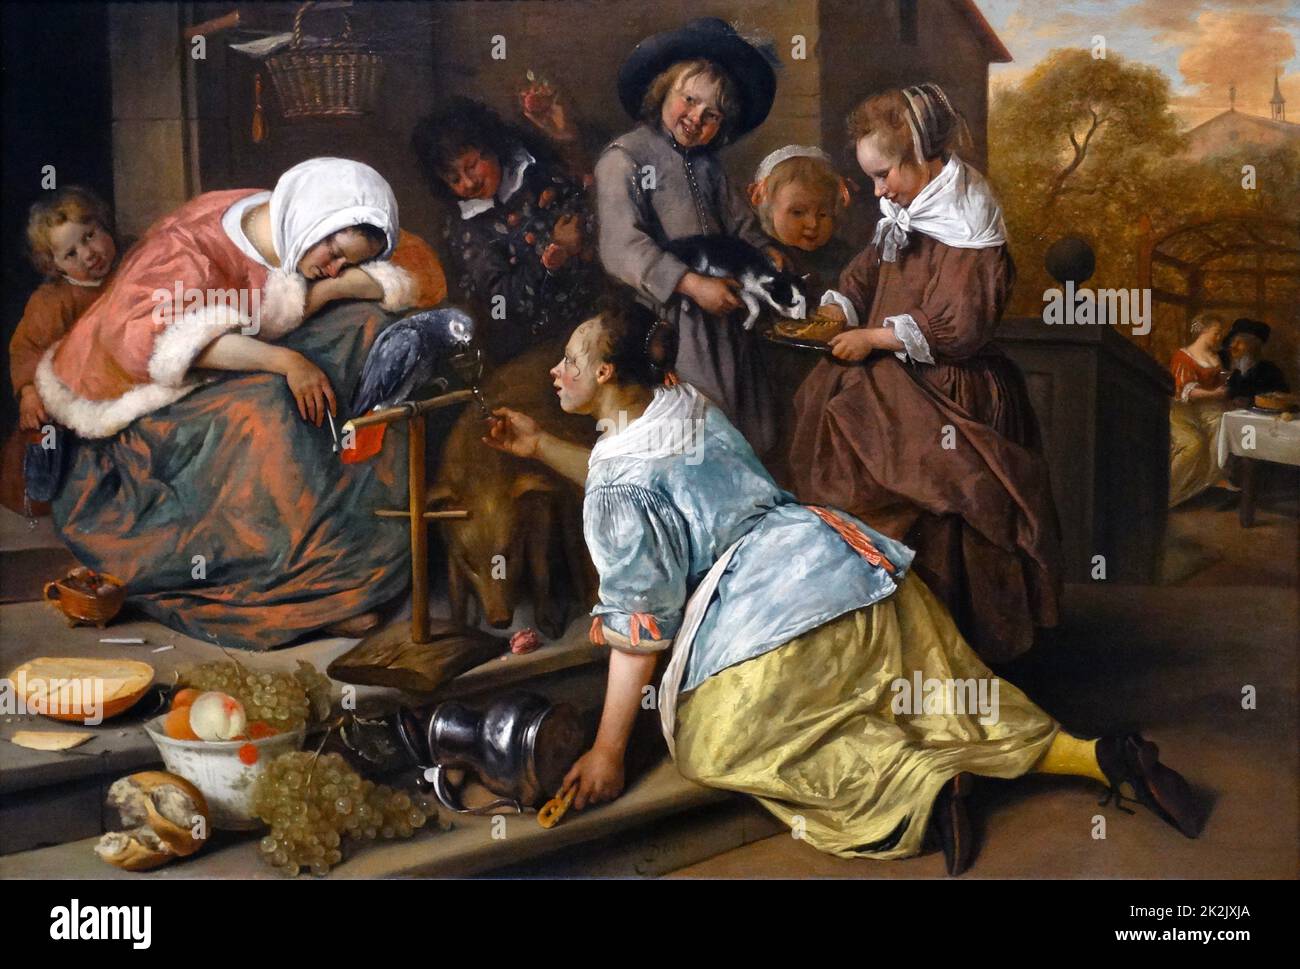 Painting titled 'The Effects of Intemperance' by Jan Steen (1626-1679) a Dutch genre painter. Dated 17th Century Stock Photo